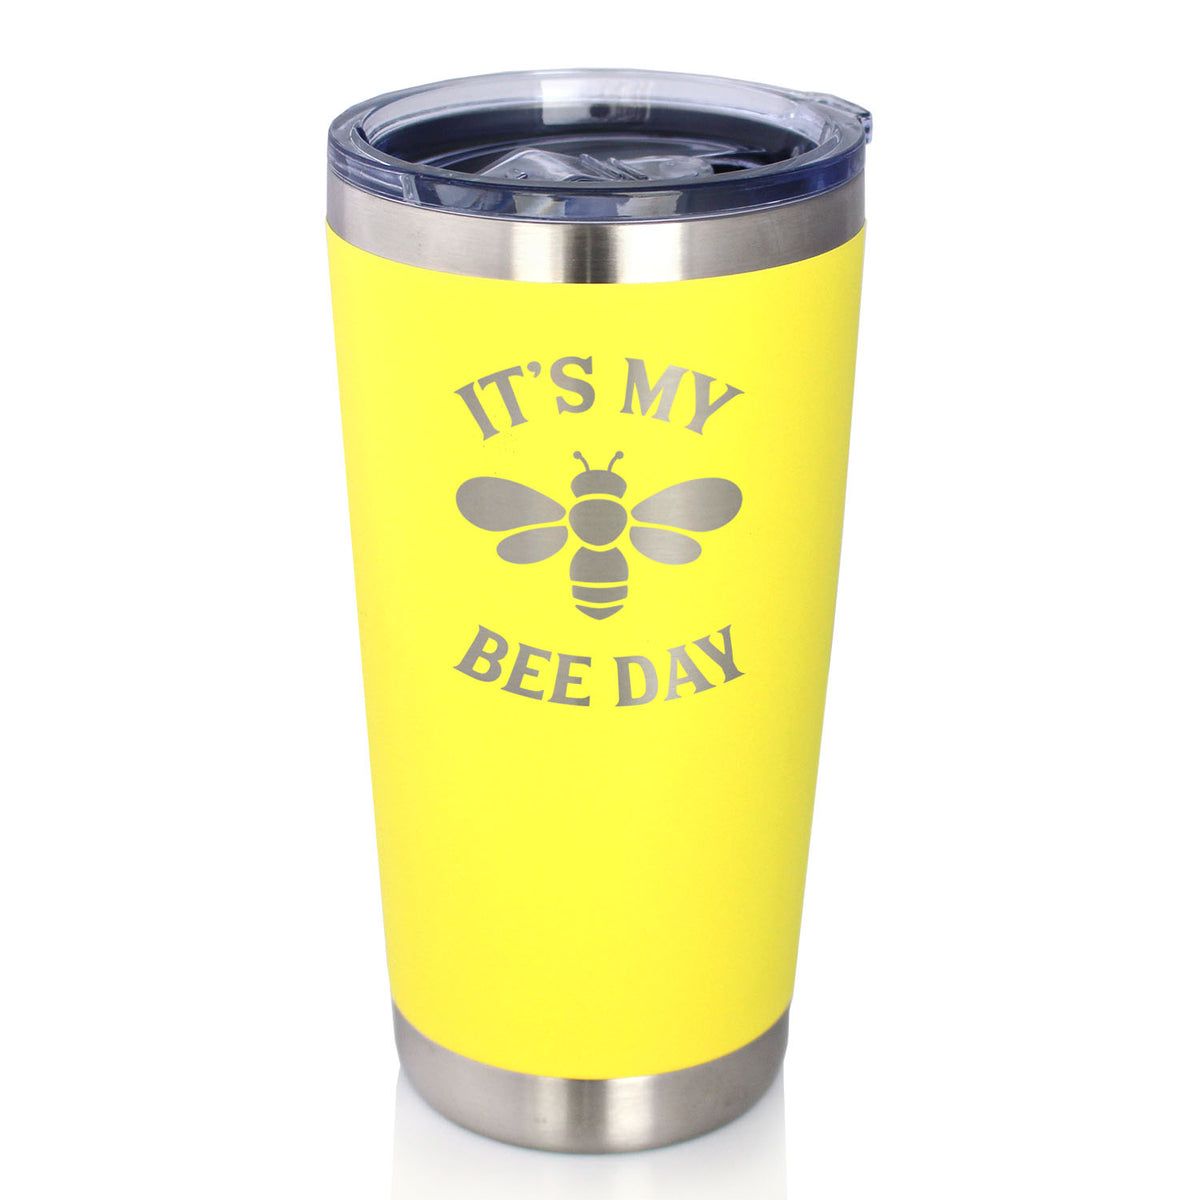 Bee Day - Funny Birthday Coffee Tumbler Cup with Sliding Lid - Stainless Steel Insulated Mug - Bumblebee Bday Party Décor